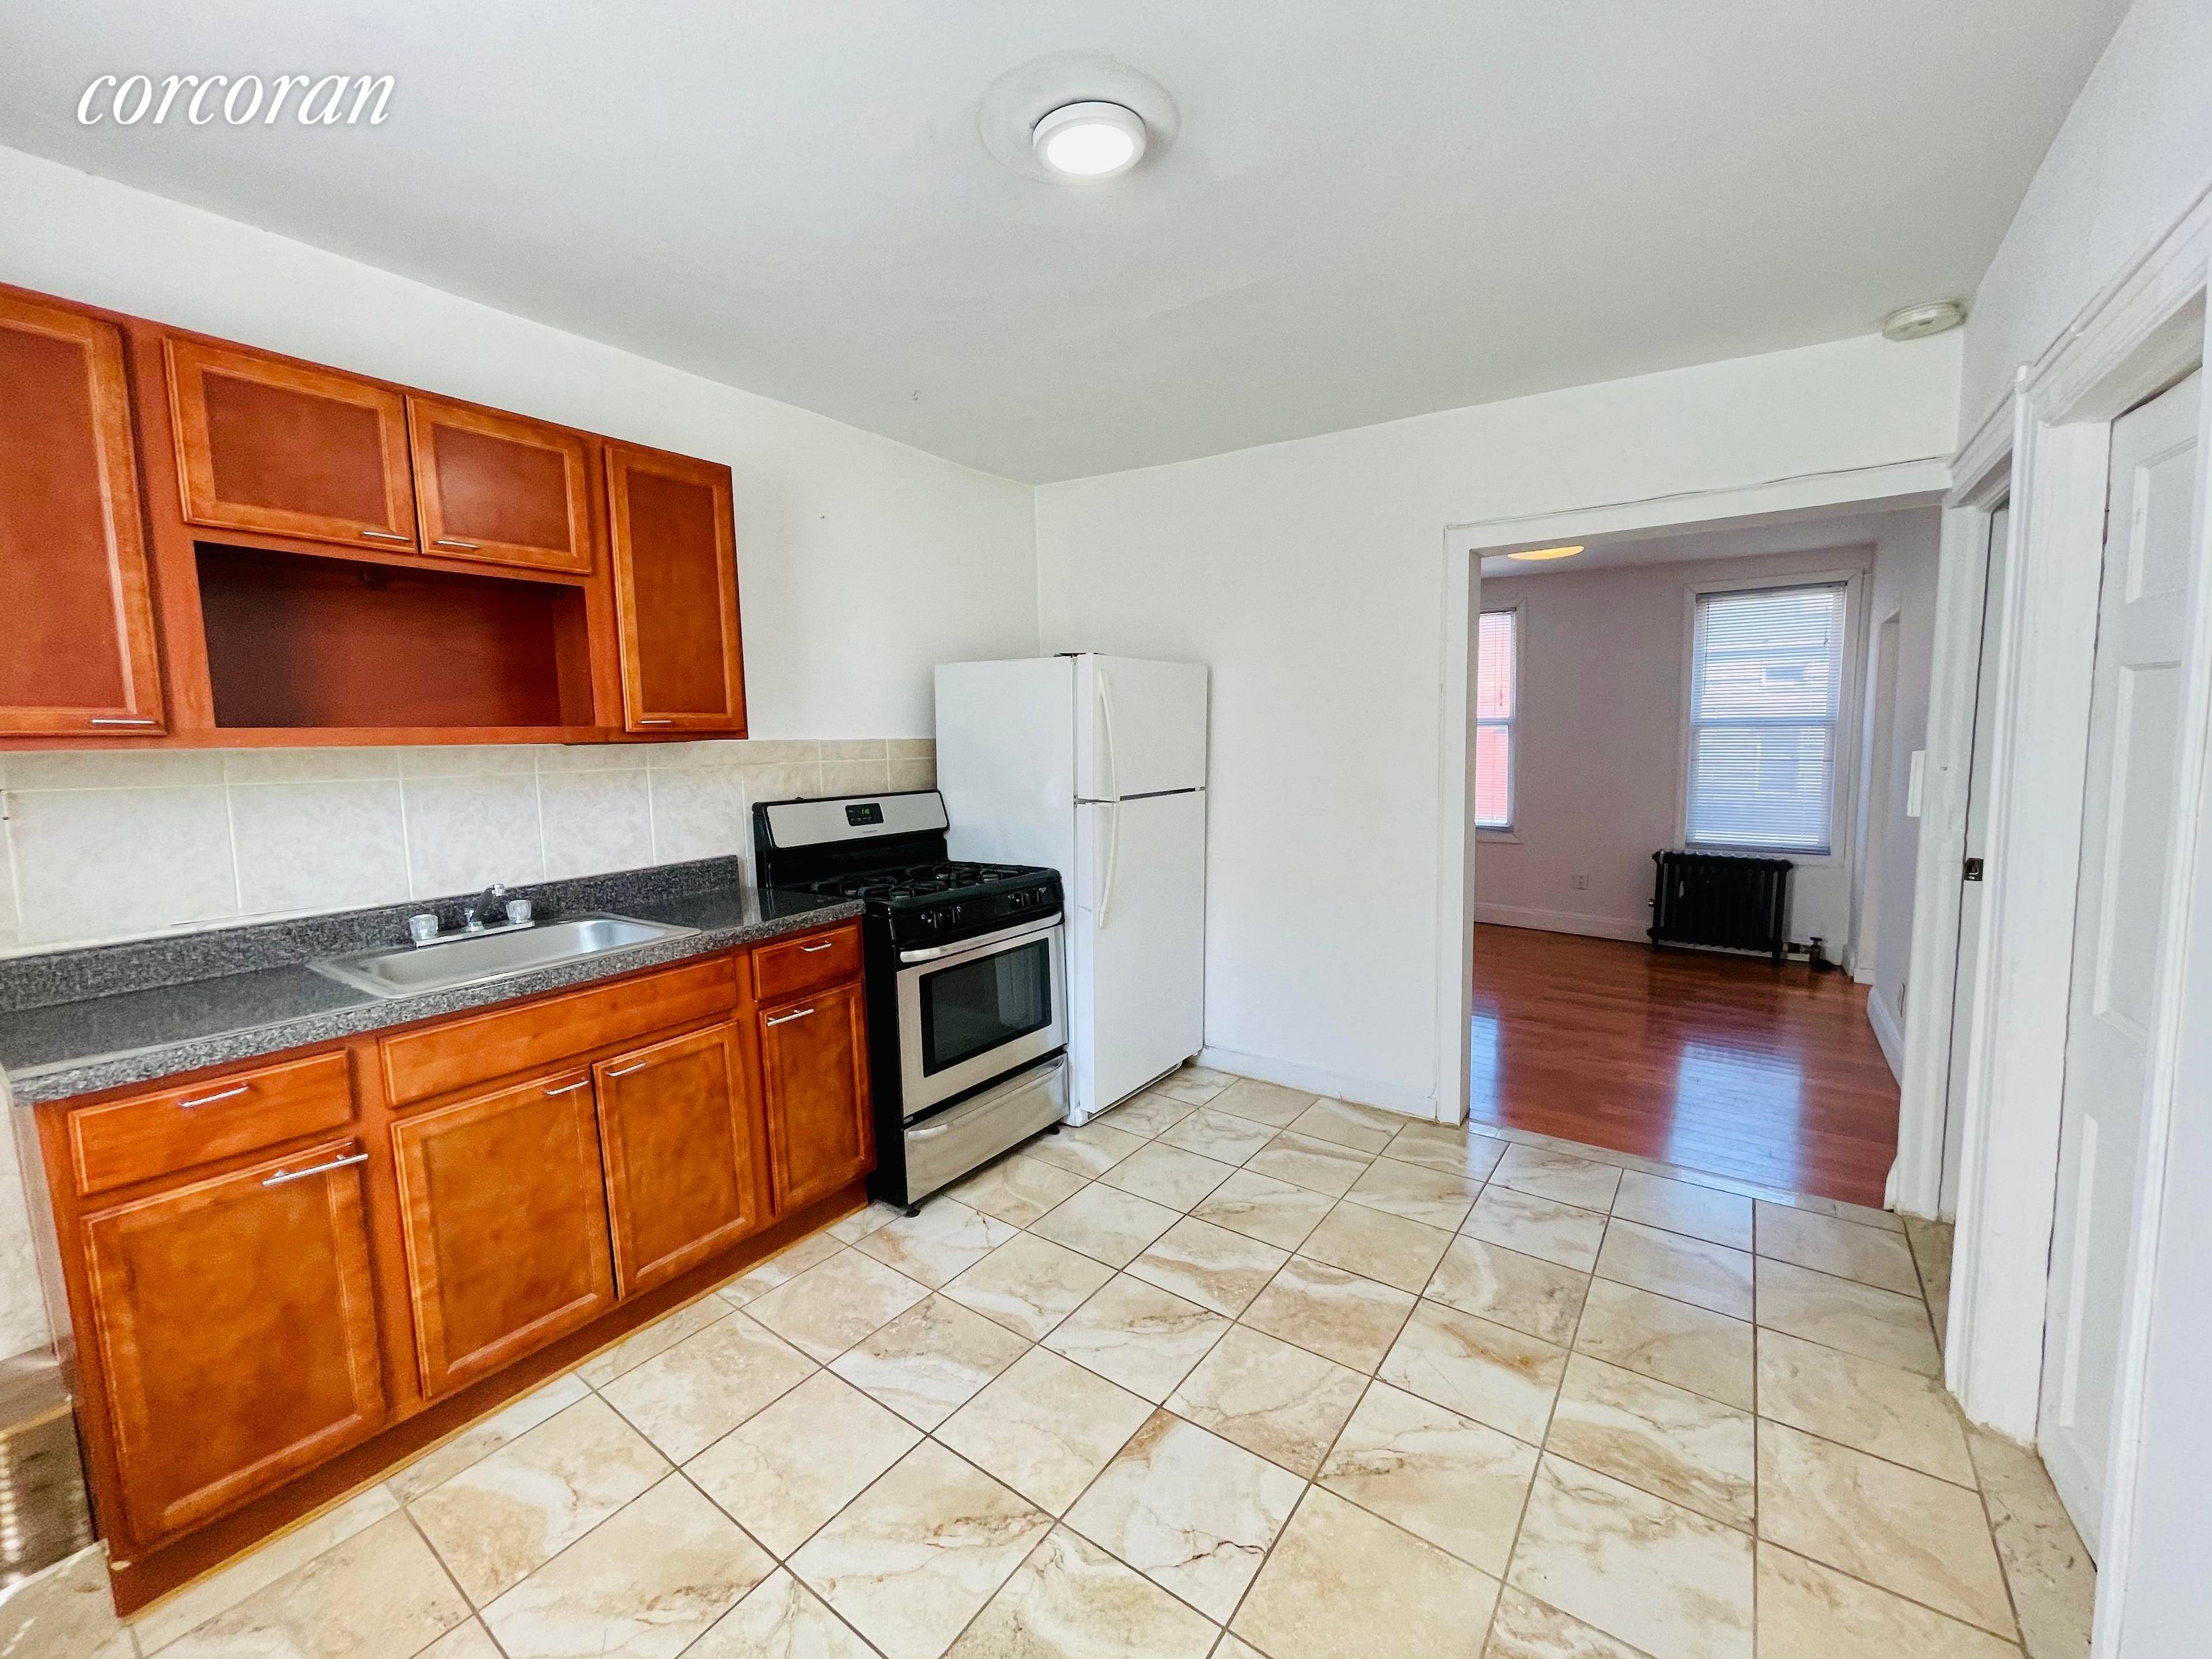 Spacious 2 bedroom located in a prime location in East Williamsburg, Brooklyn.